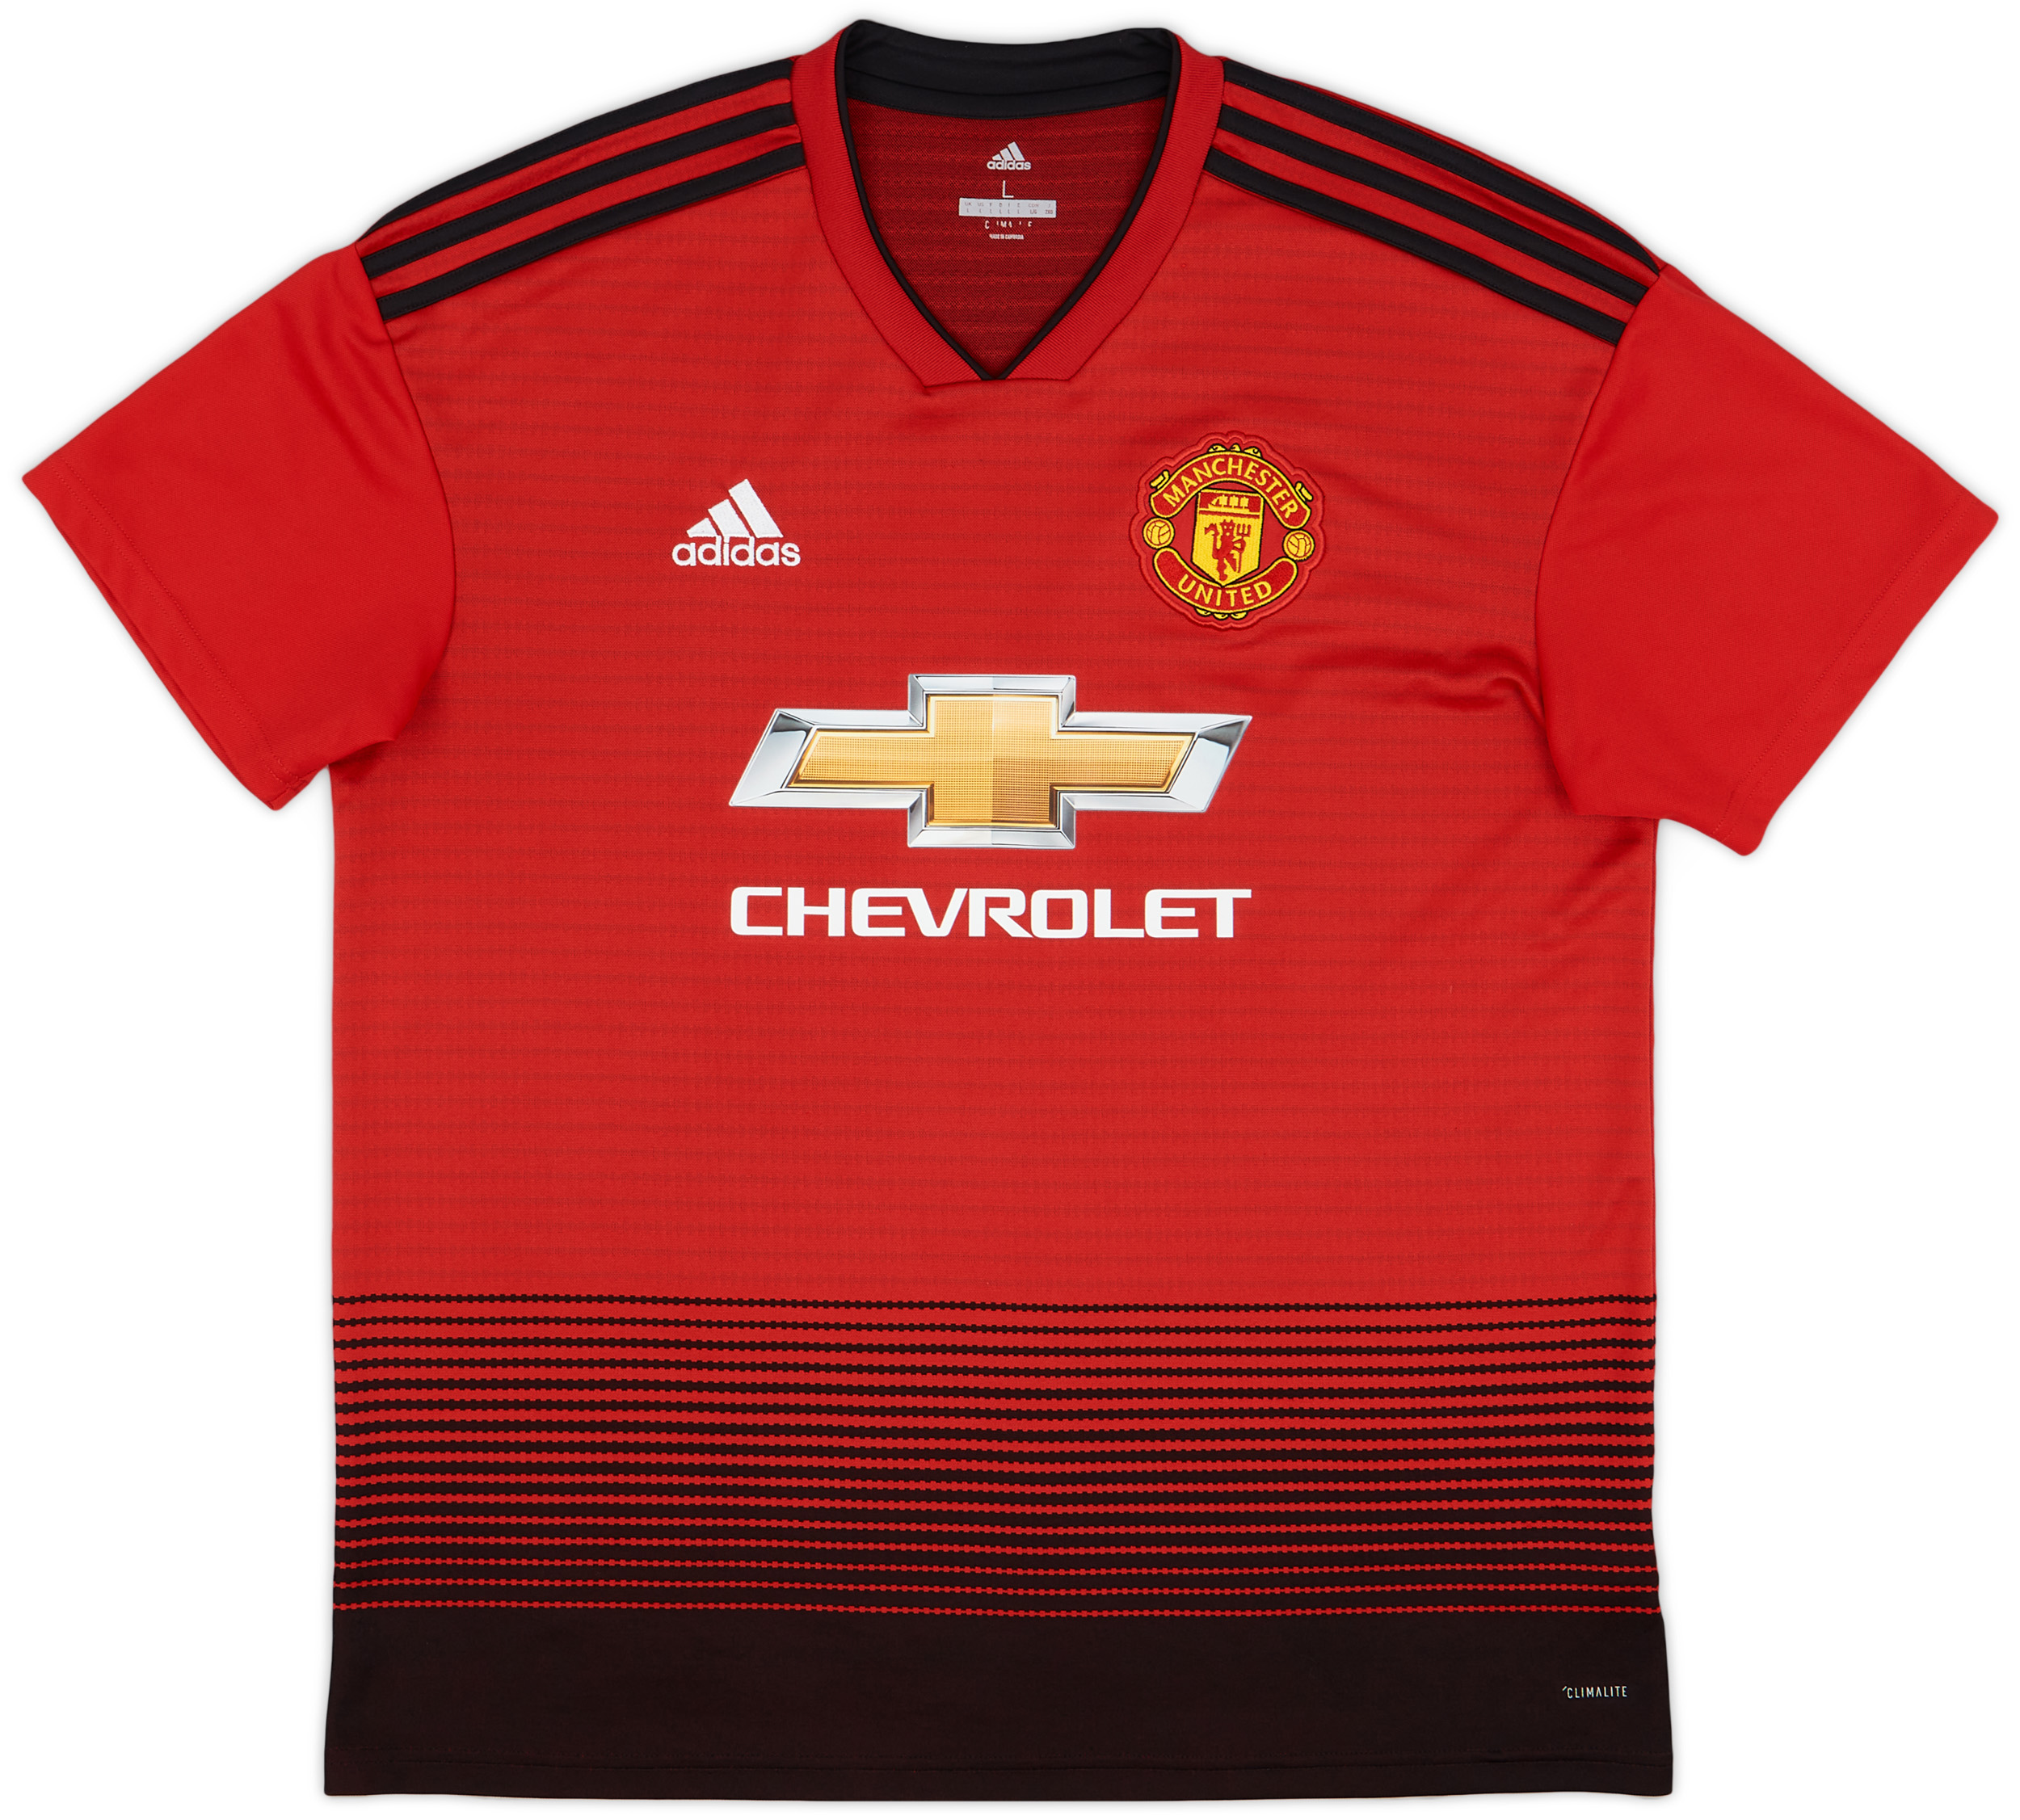 2018-19 Manchester United Home Shirt - 9/10 - (L)